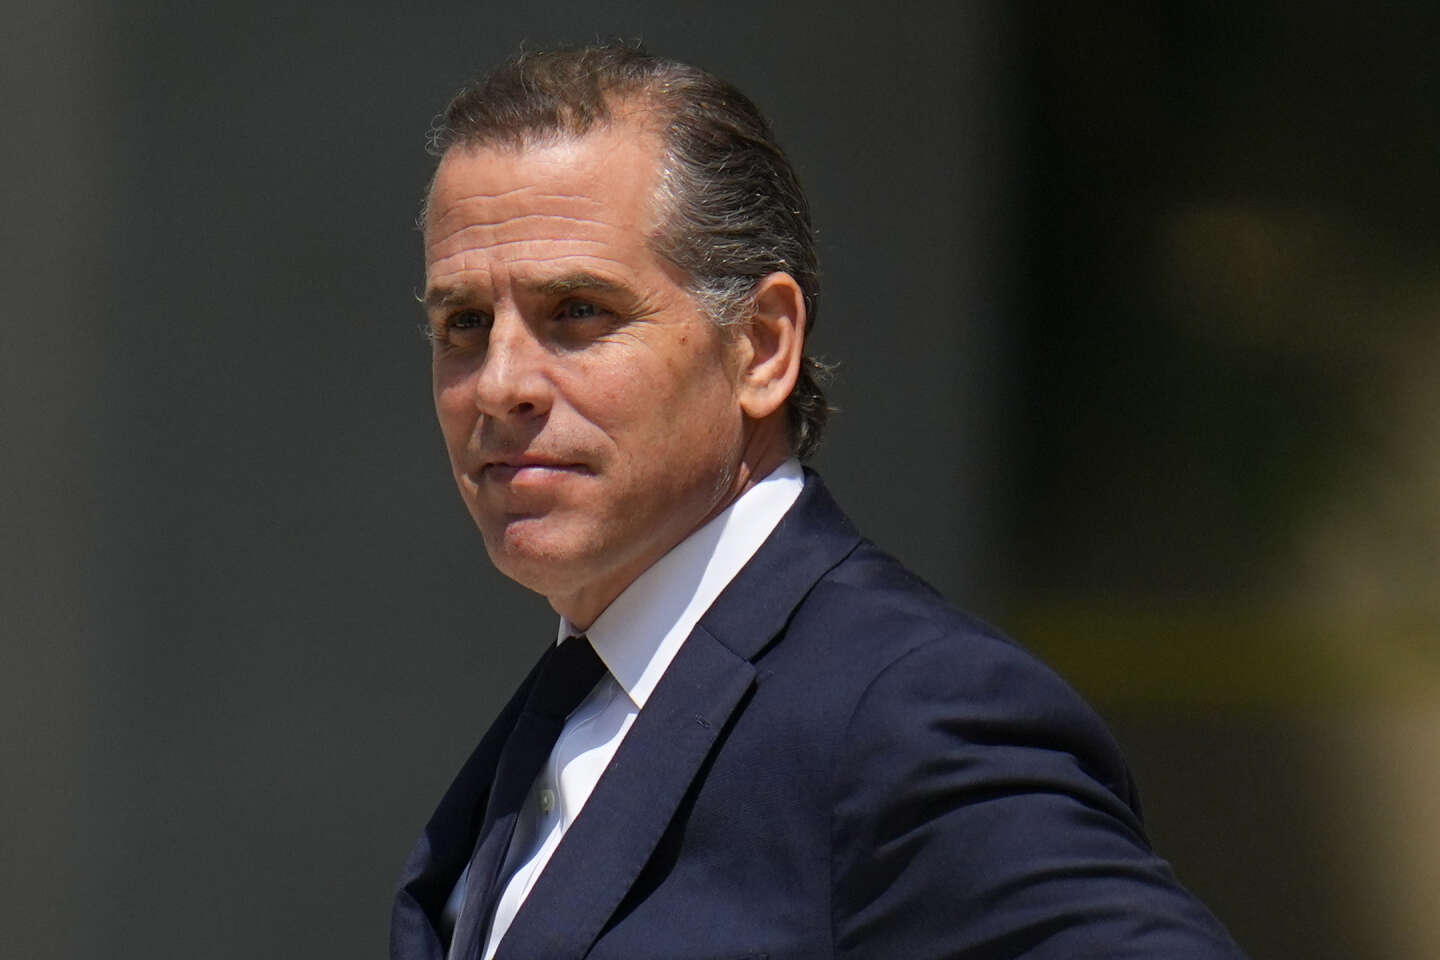 Hunter Biden, the son of the President of the United States, has been indicted federally for illegal gun possession